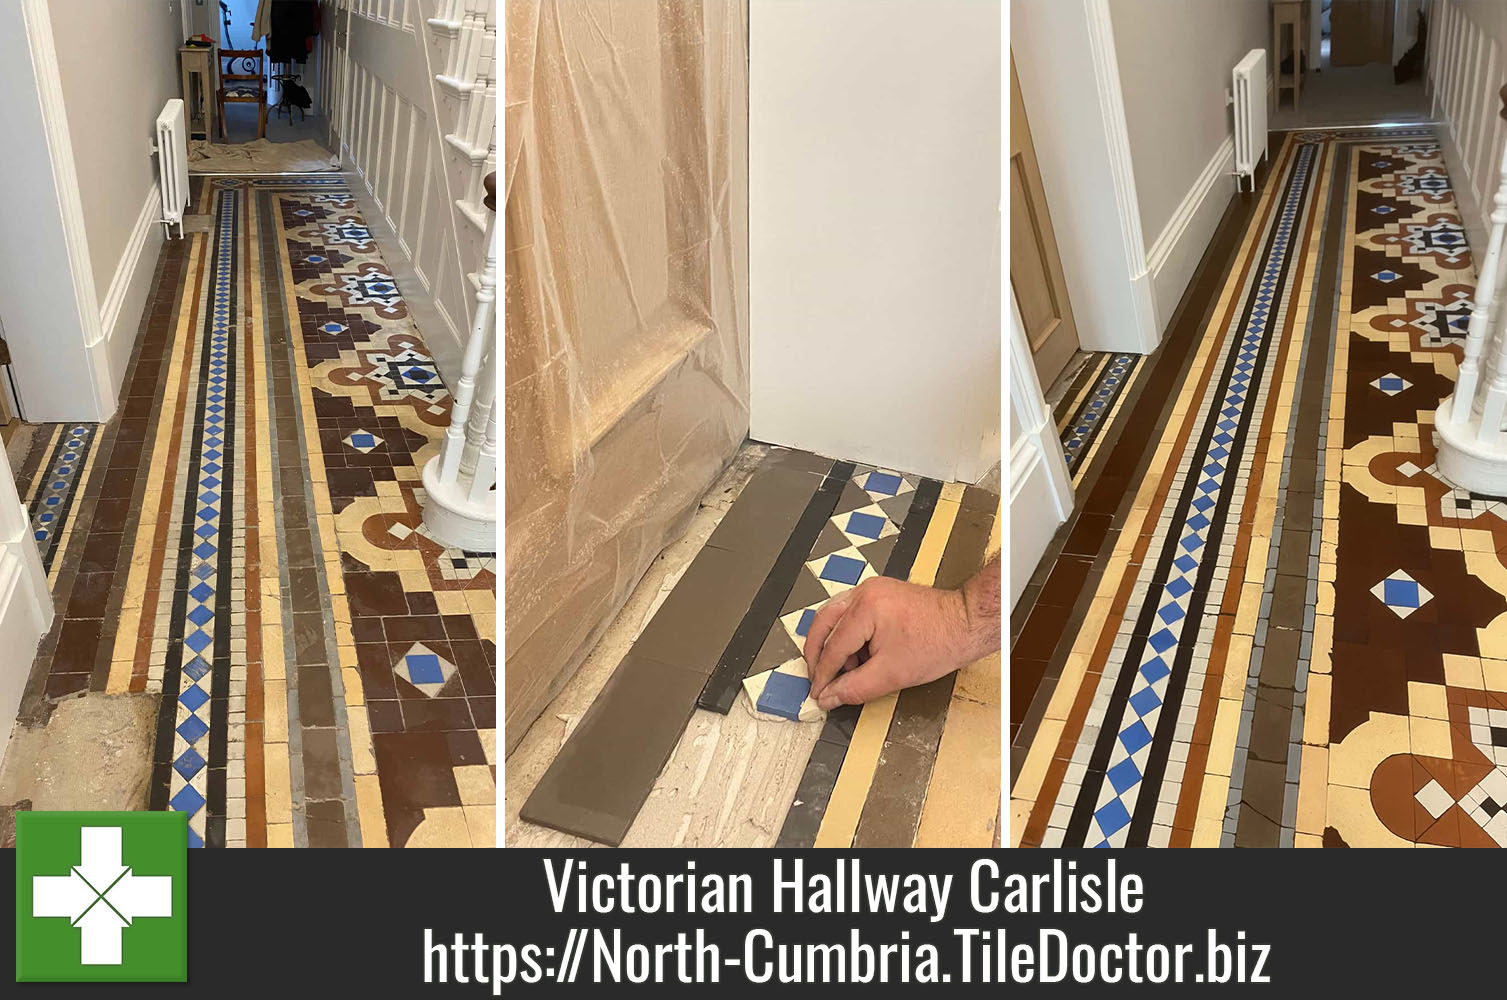 Low Moisture Cleaning of a Victorian Floor with the Tile Doctor Gel Cleaning System 